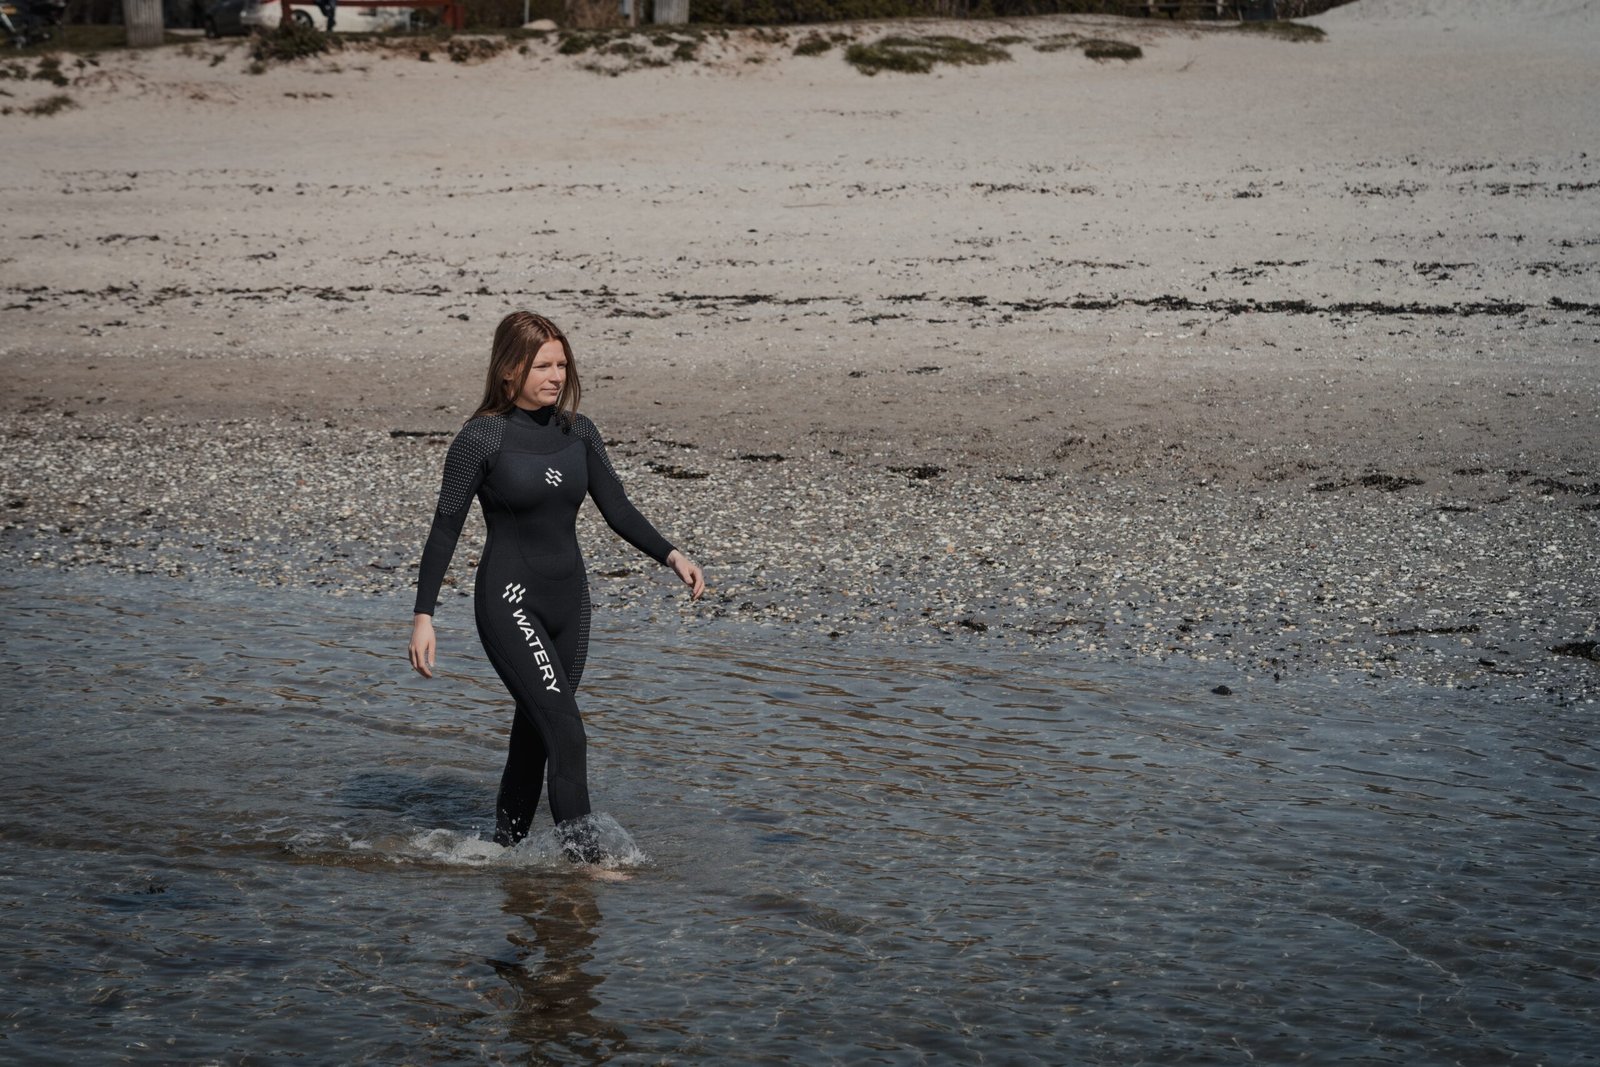 woman in black wet suit running on water during daytime